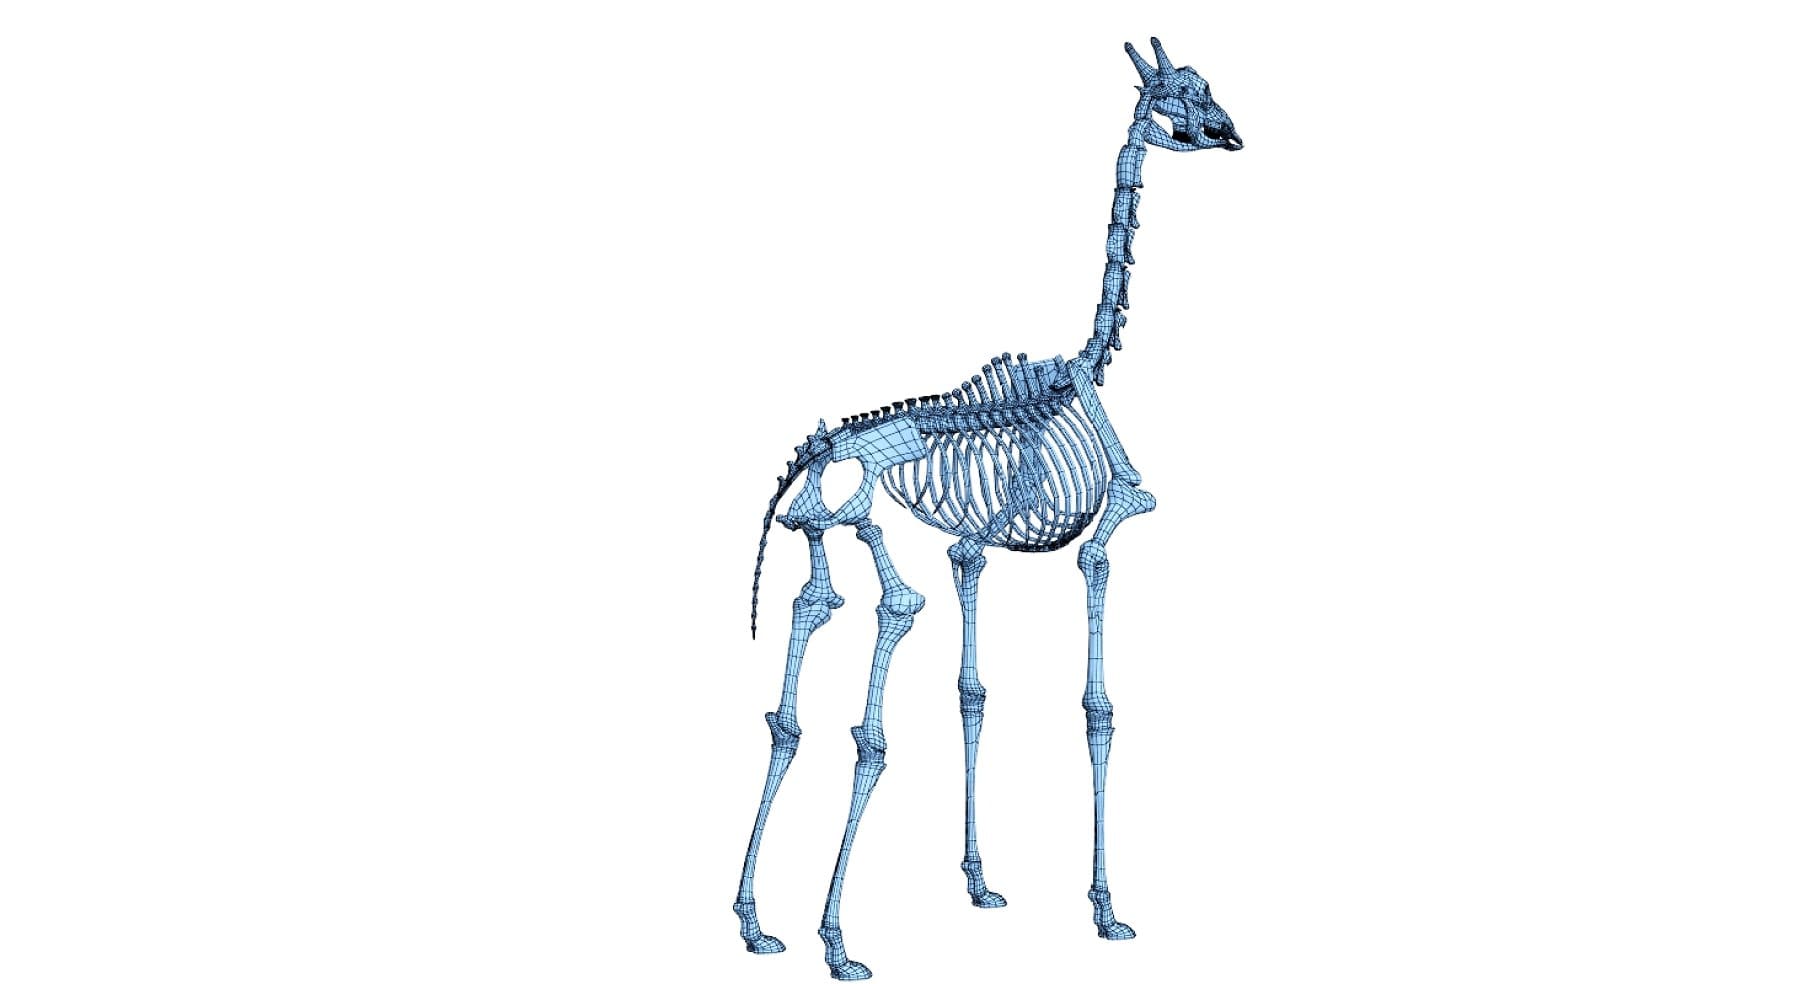 Image of a blue 3D model of a giraffe whose legs are made of long bones.